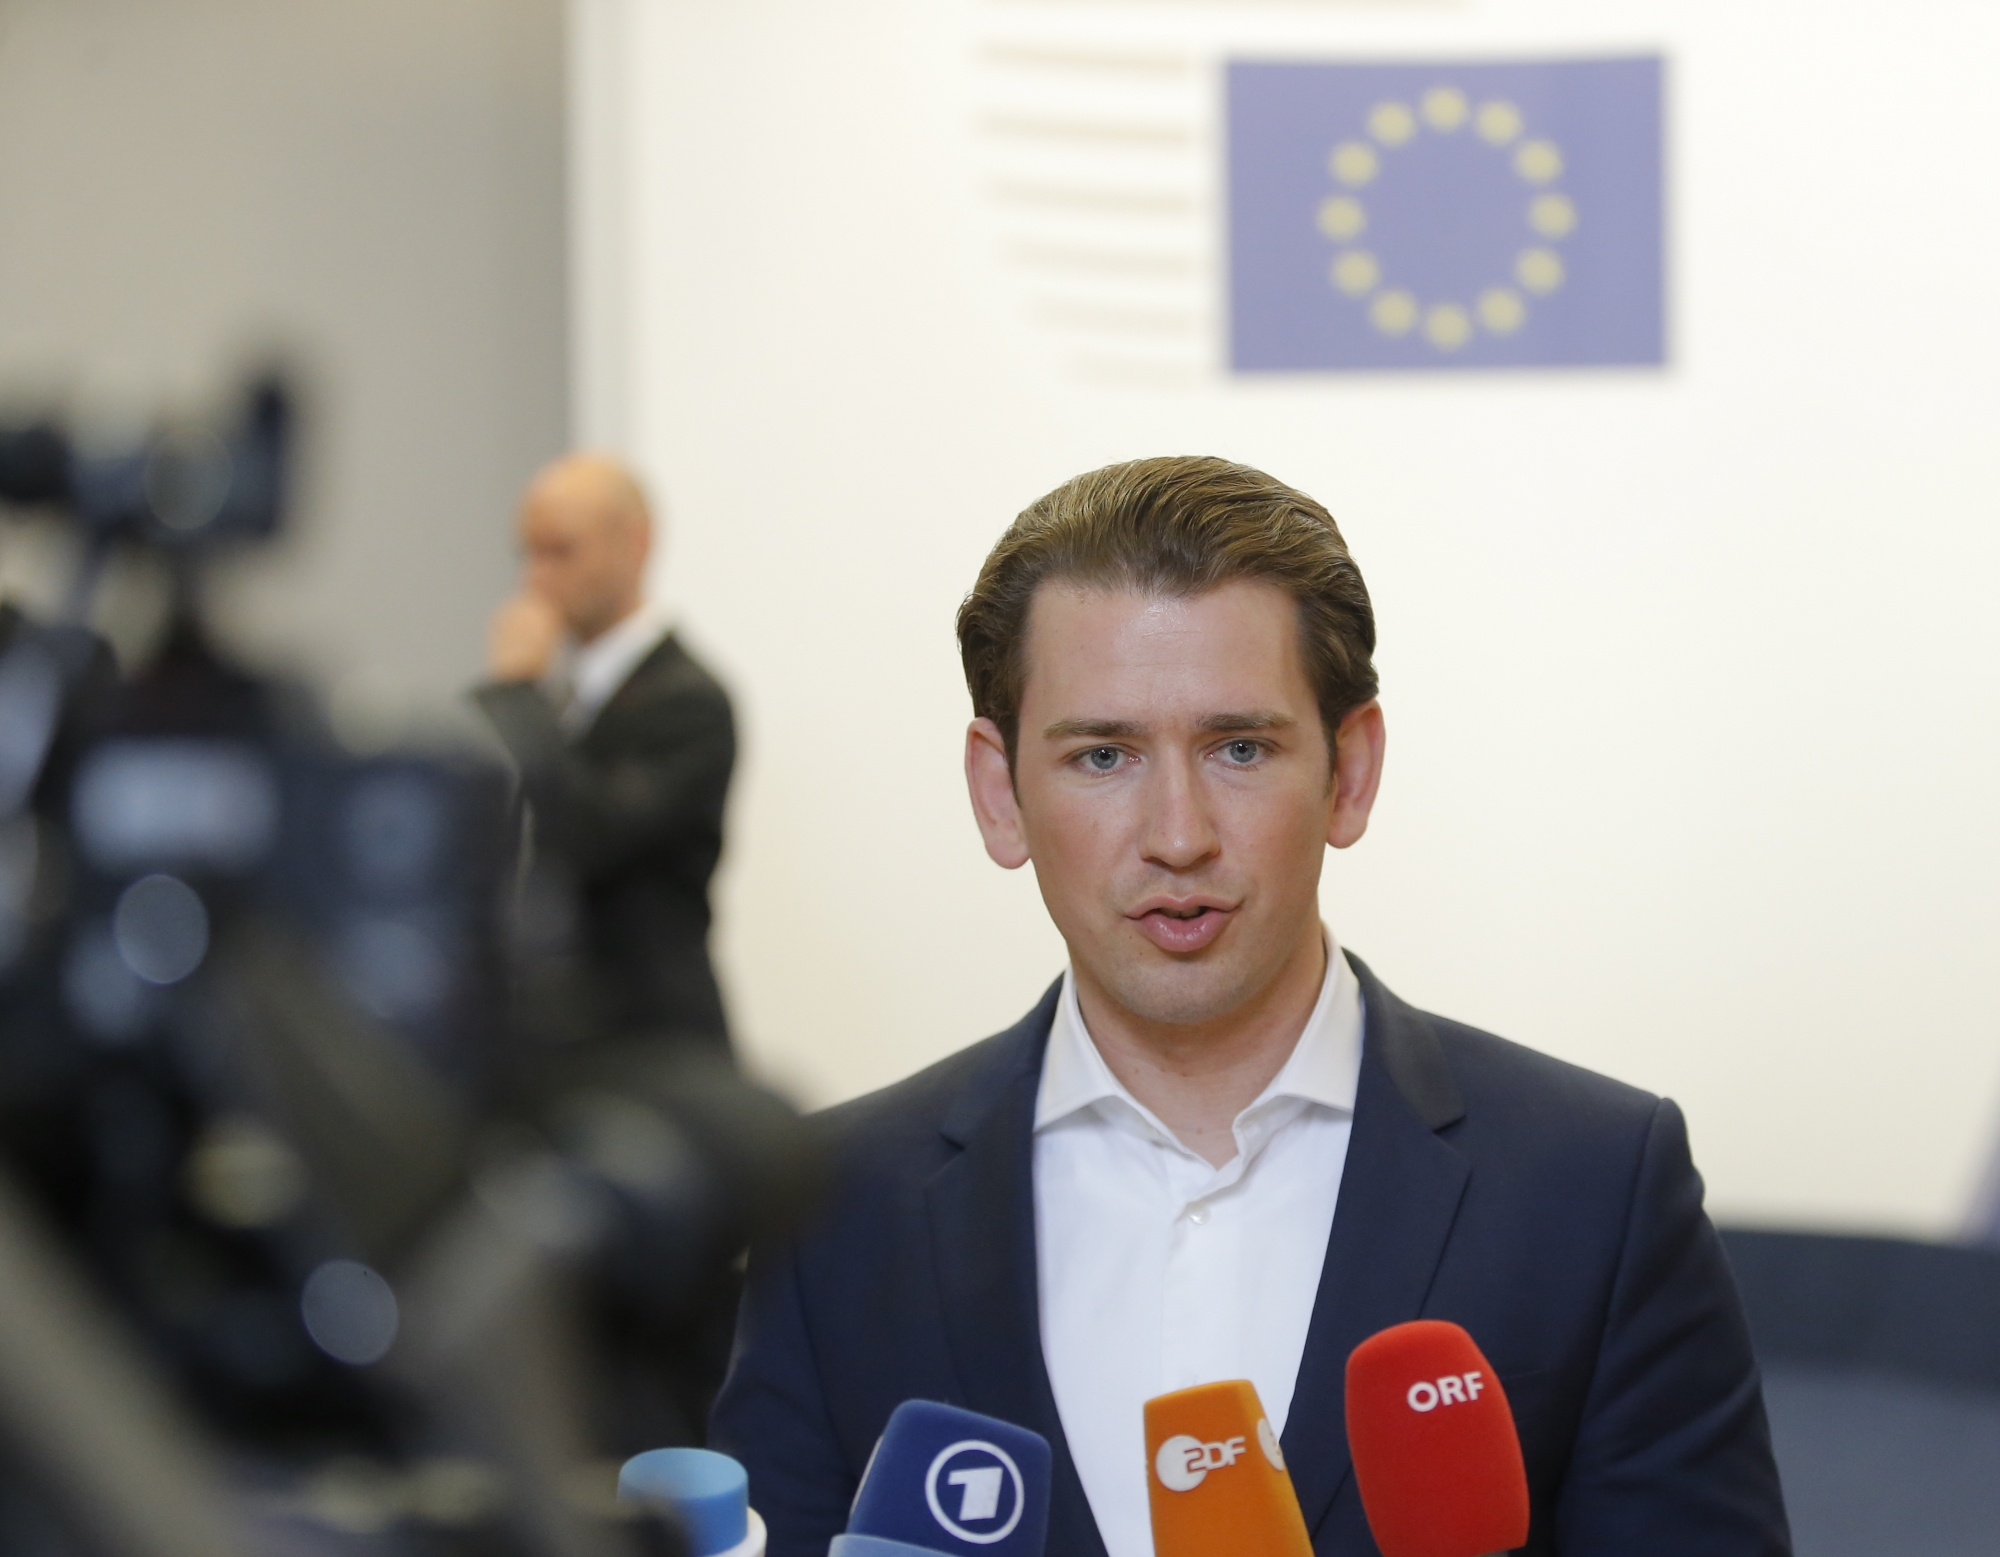 epa06849076 Austria's Chancellor Sebastian Kurz speaks at the end of a night of negotiation on migration during an European Council summit in Brussels, Belgium, 29 June 2018. EU countries' leaders met on 28 and 29 June for a summit to discuss migration in general, the installation of asylum-seeker processing centers in northern Africa, and other security- and economy-related topics including Brexit.  EPA/OLIVIER HOSLET BELGIUM EU COUNCIL SUMMIT